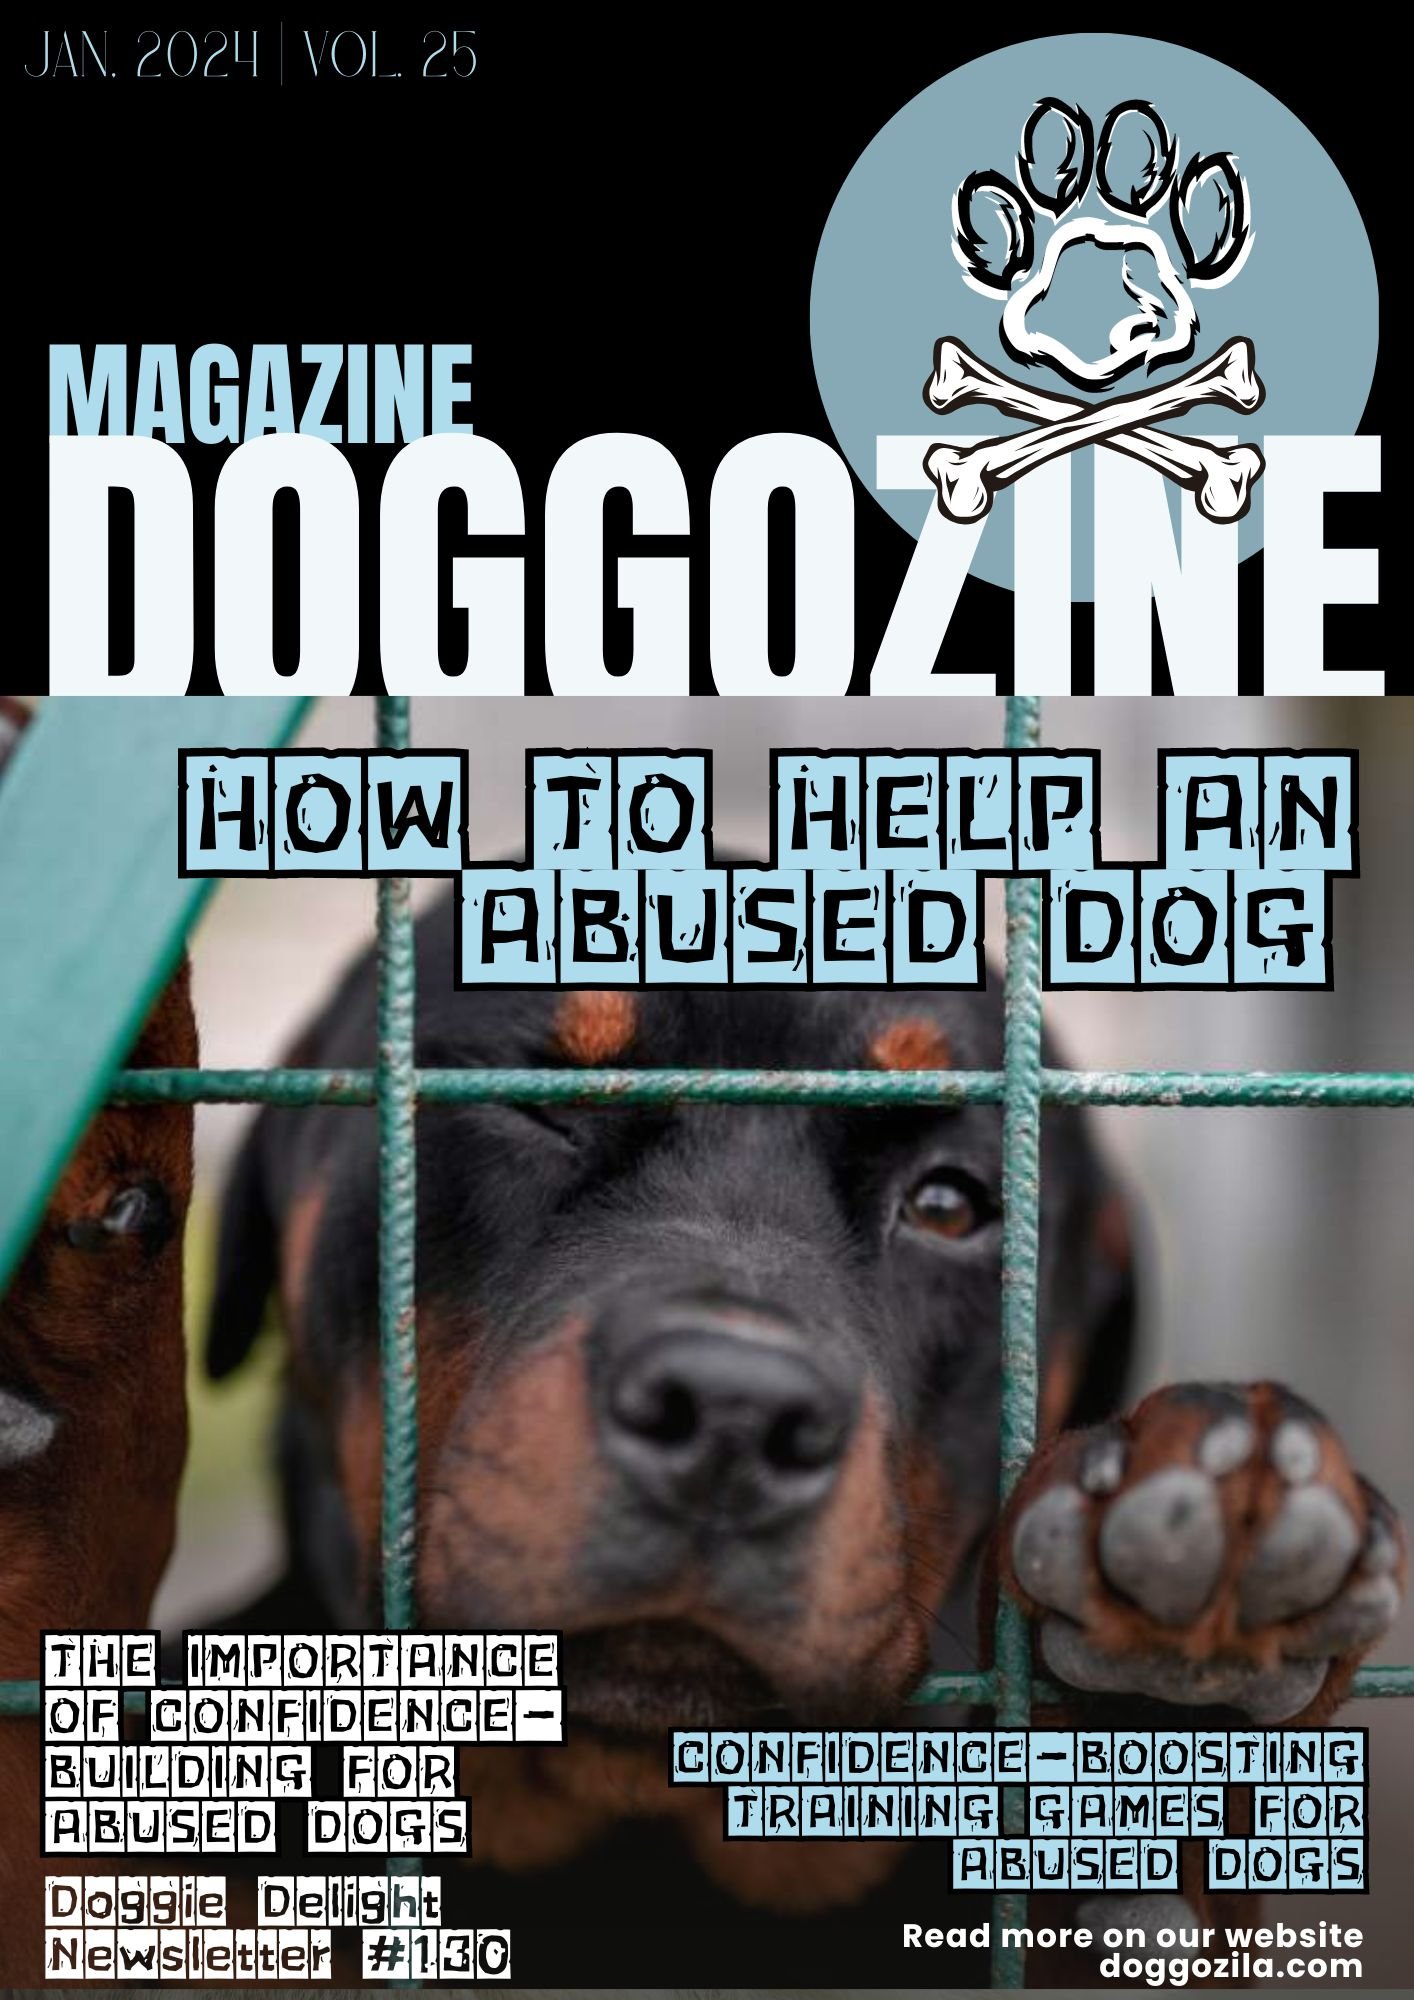 how to help an abused dog